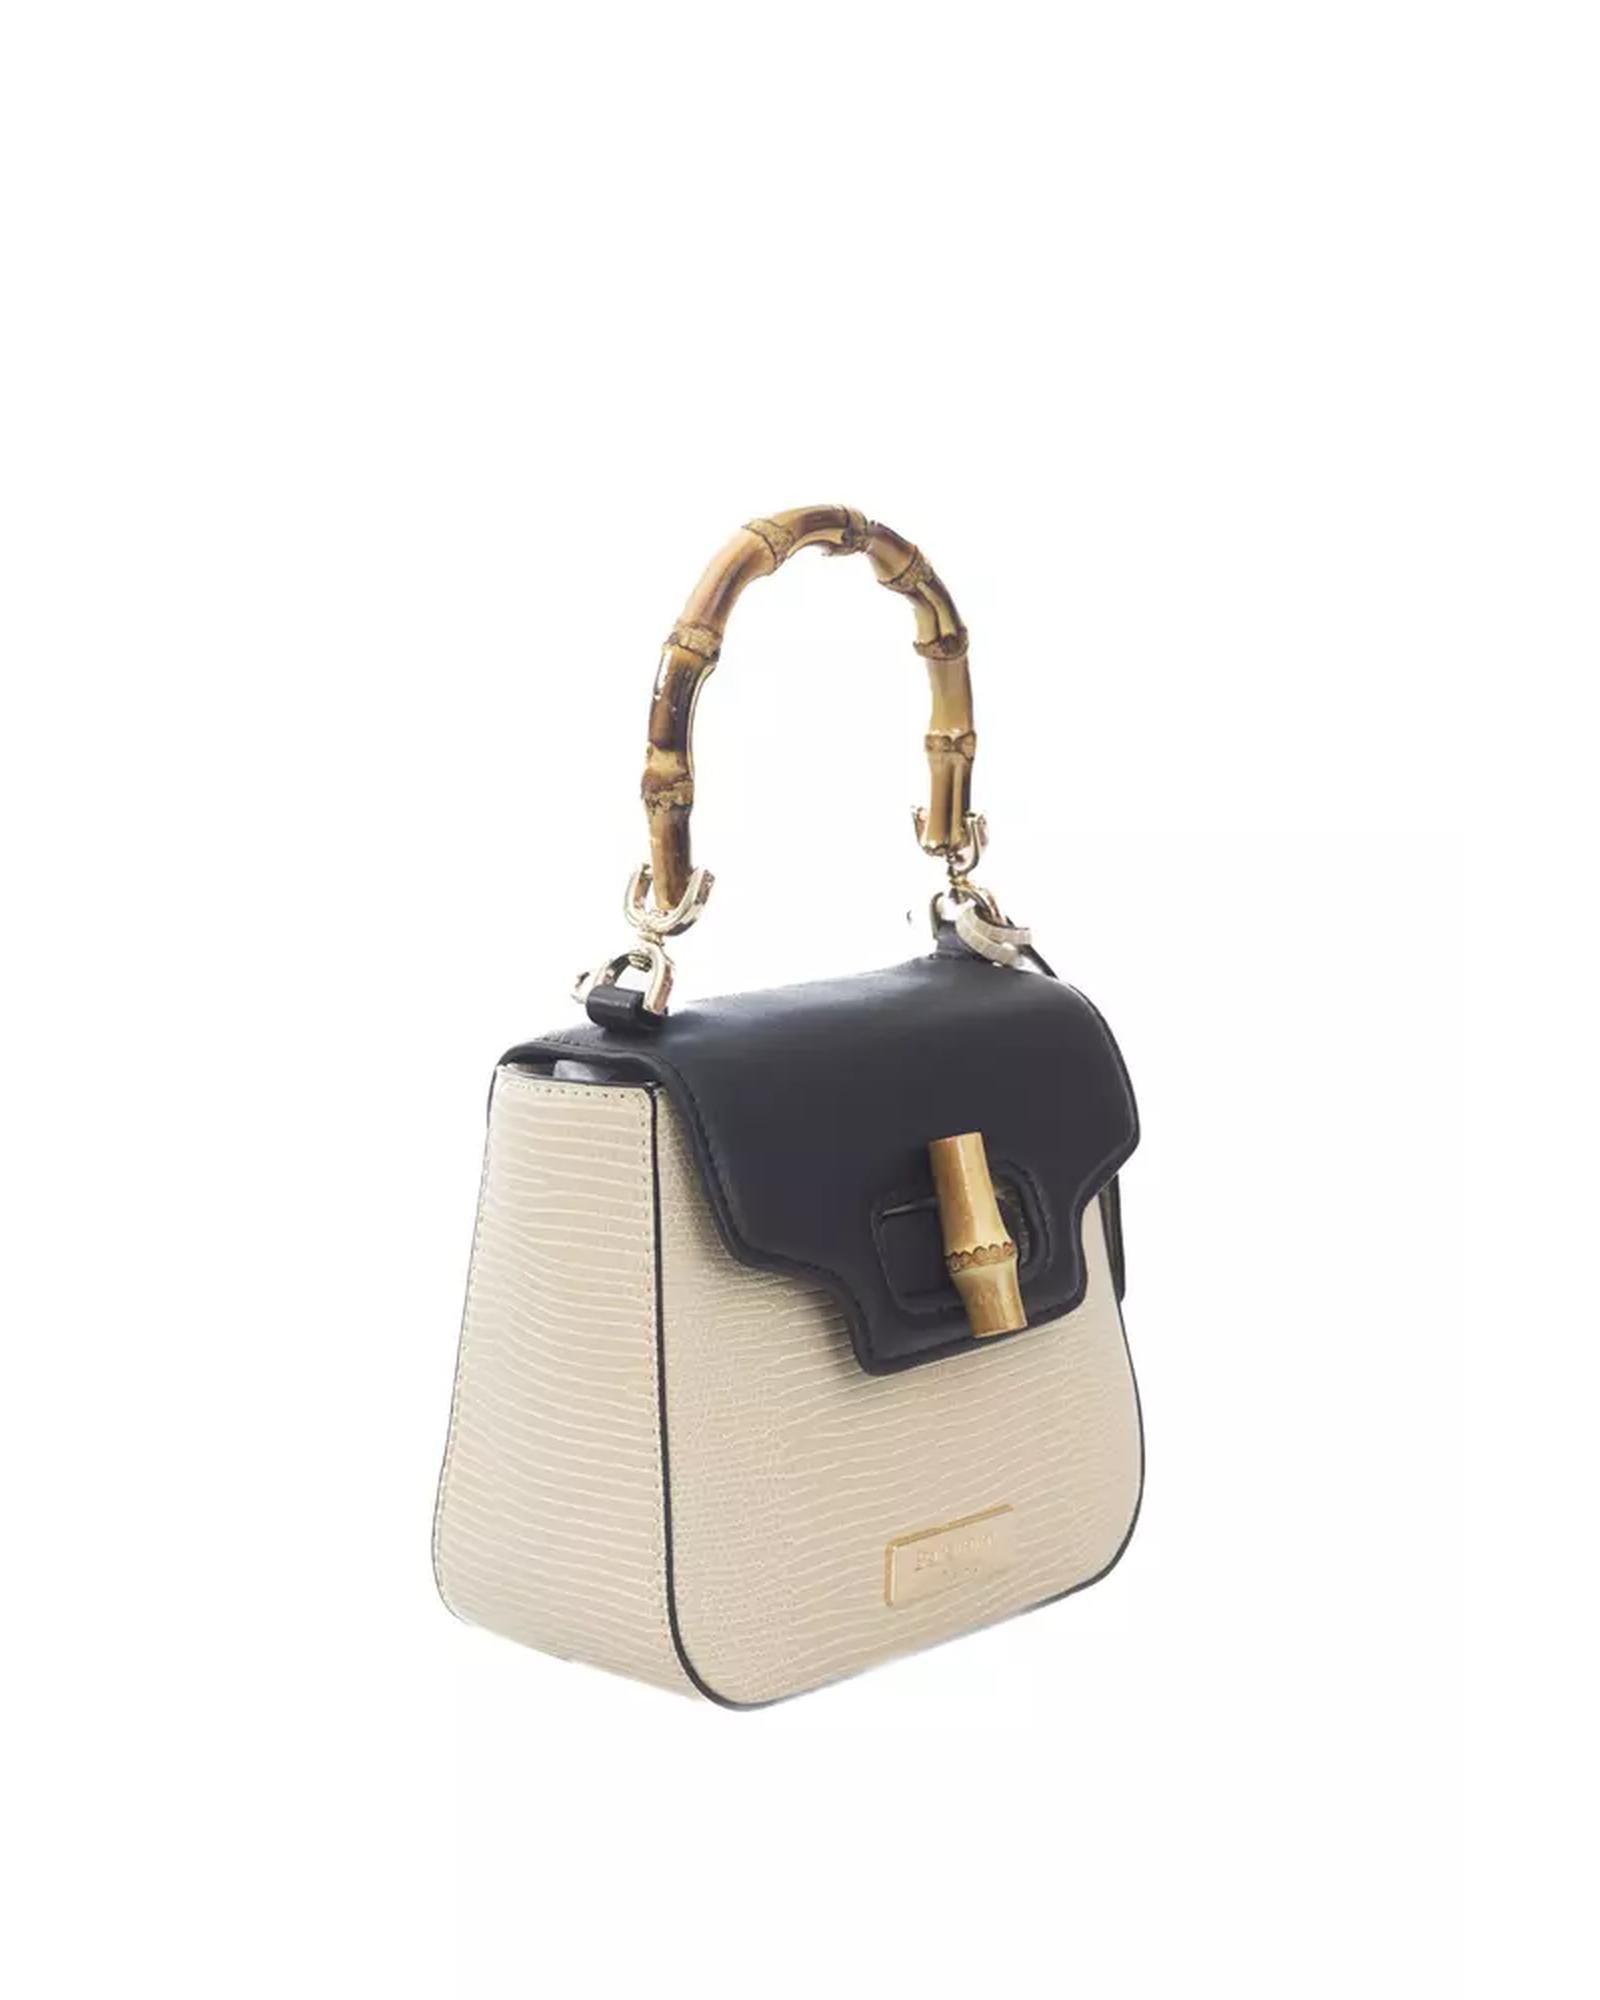 Golden Logoed Flap Shoulder Bag with Internal Compartments One Size Women